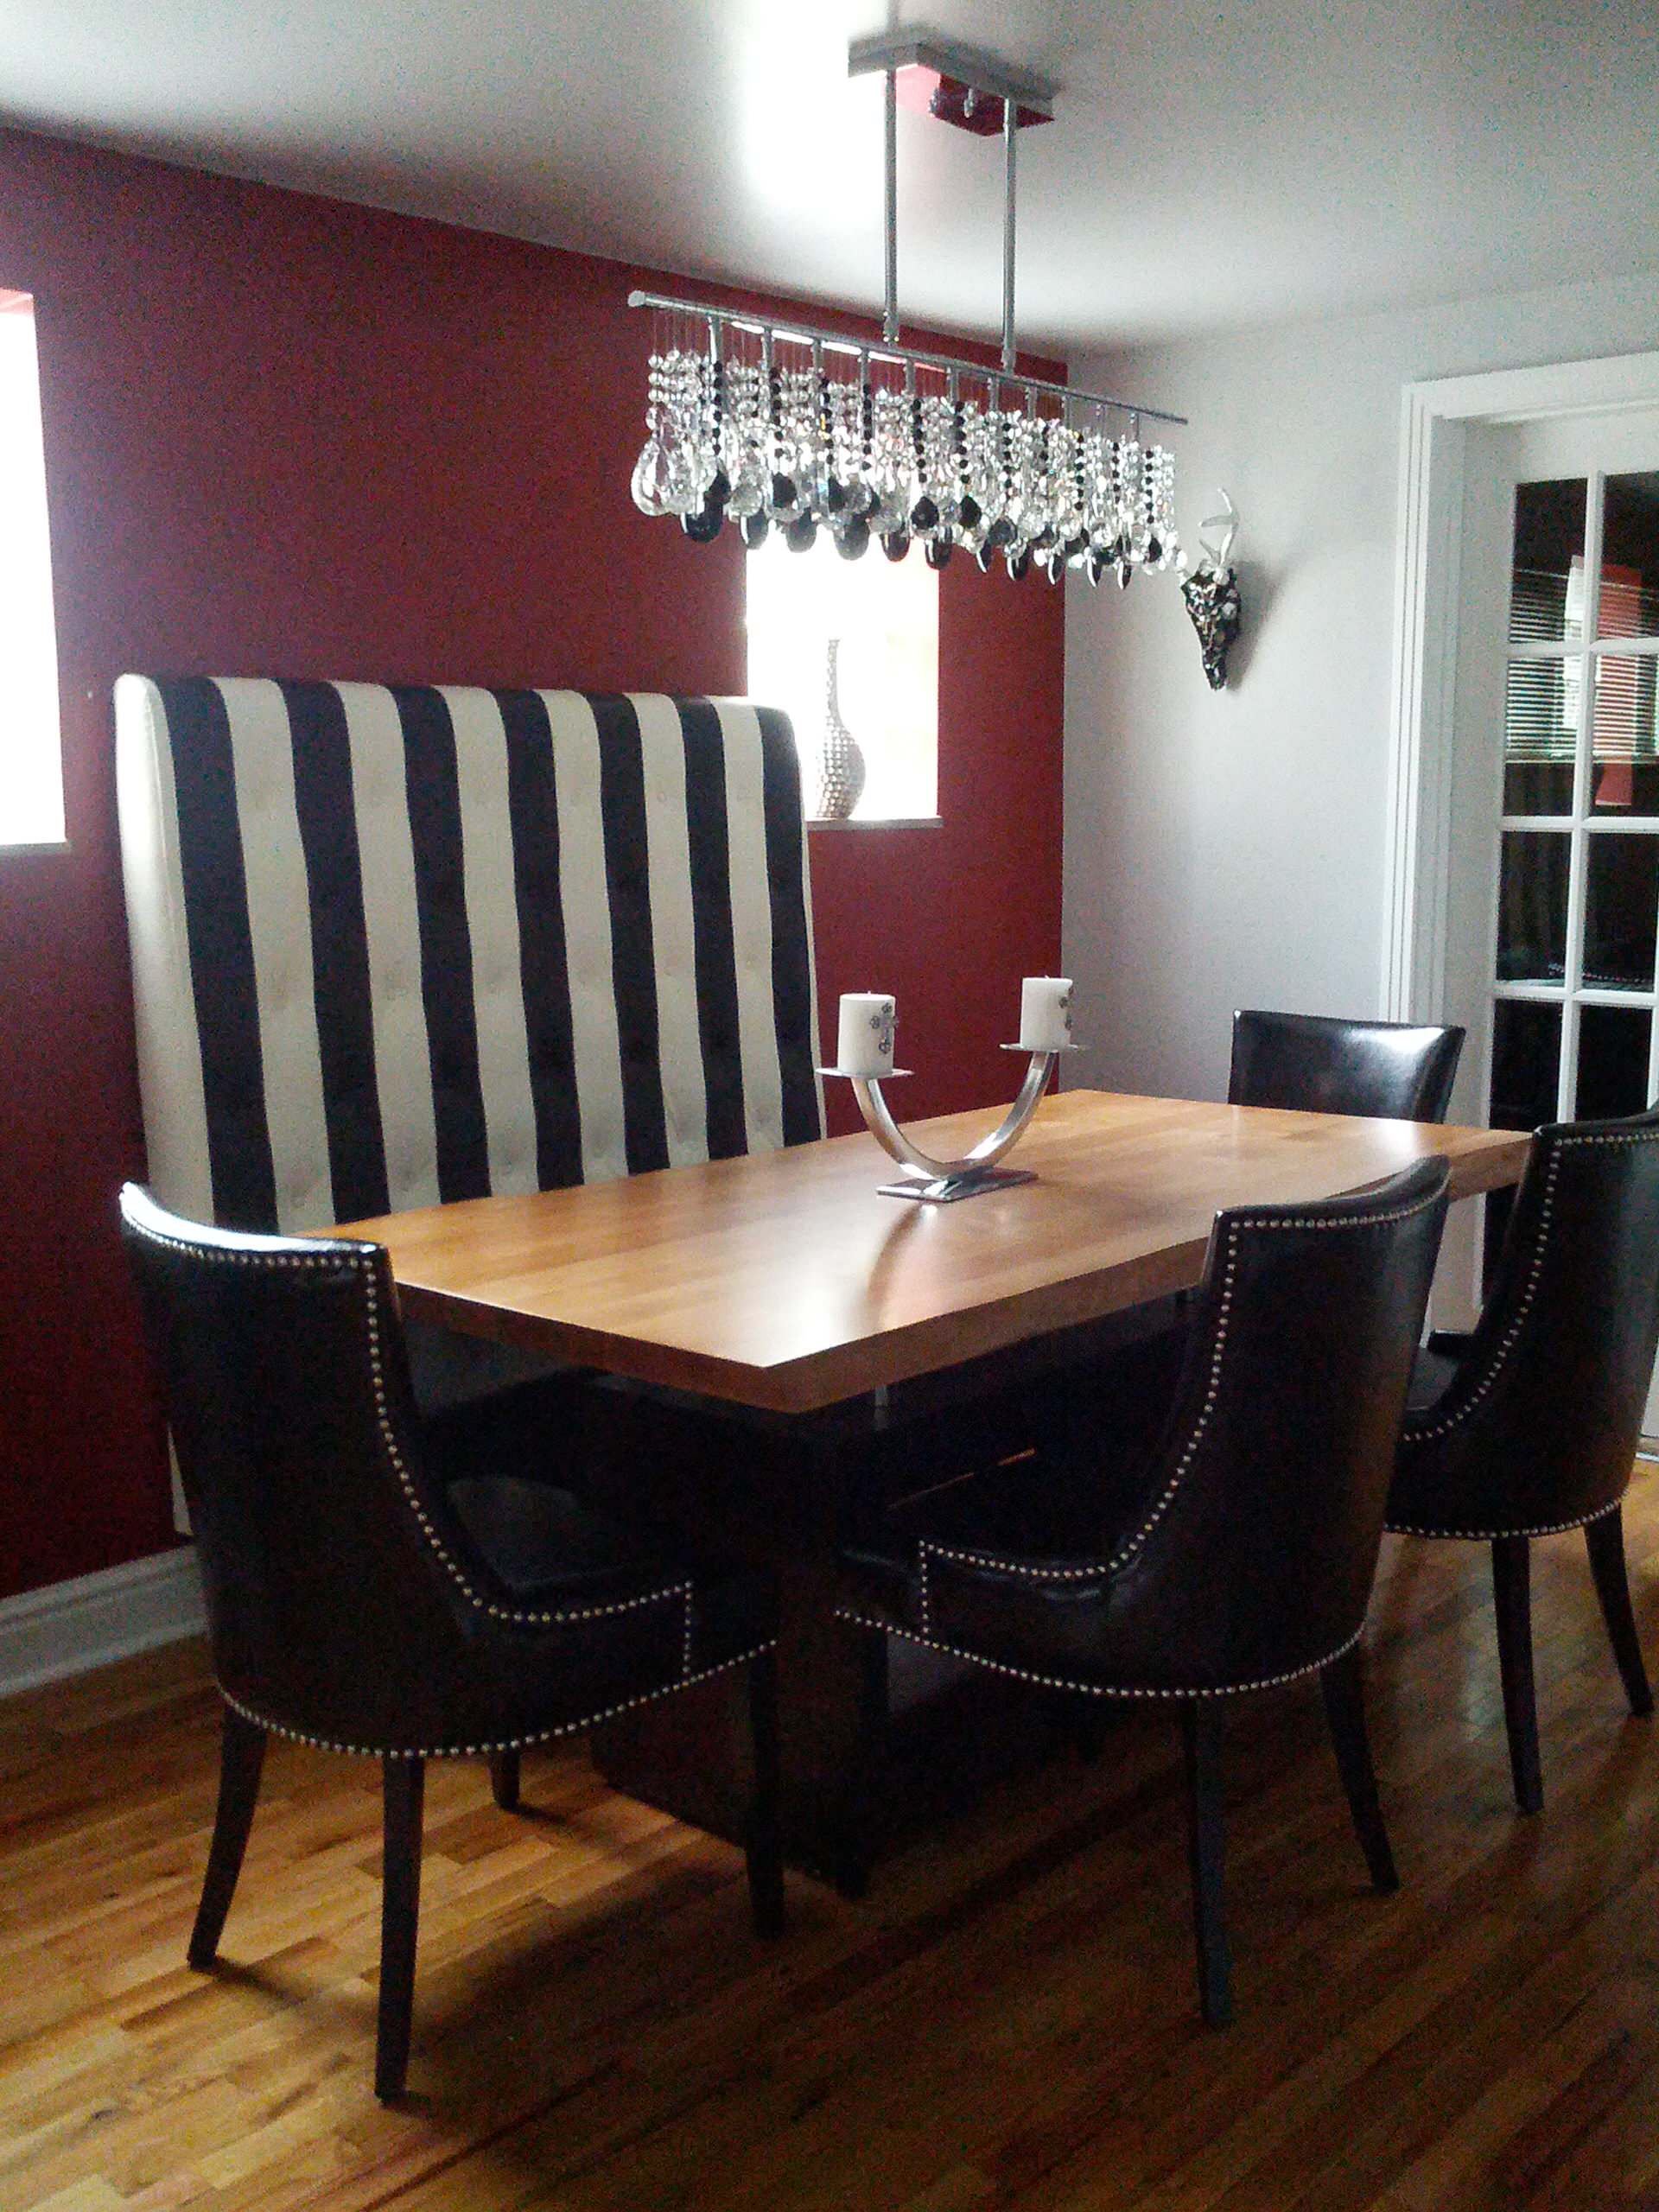 A Great Small Dining Space by Eccentricity Designs